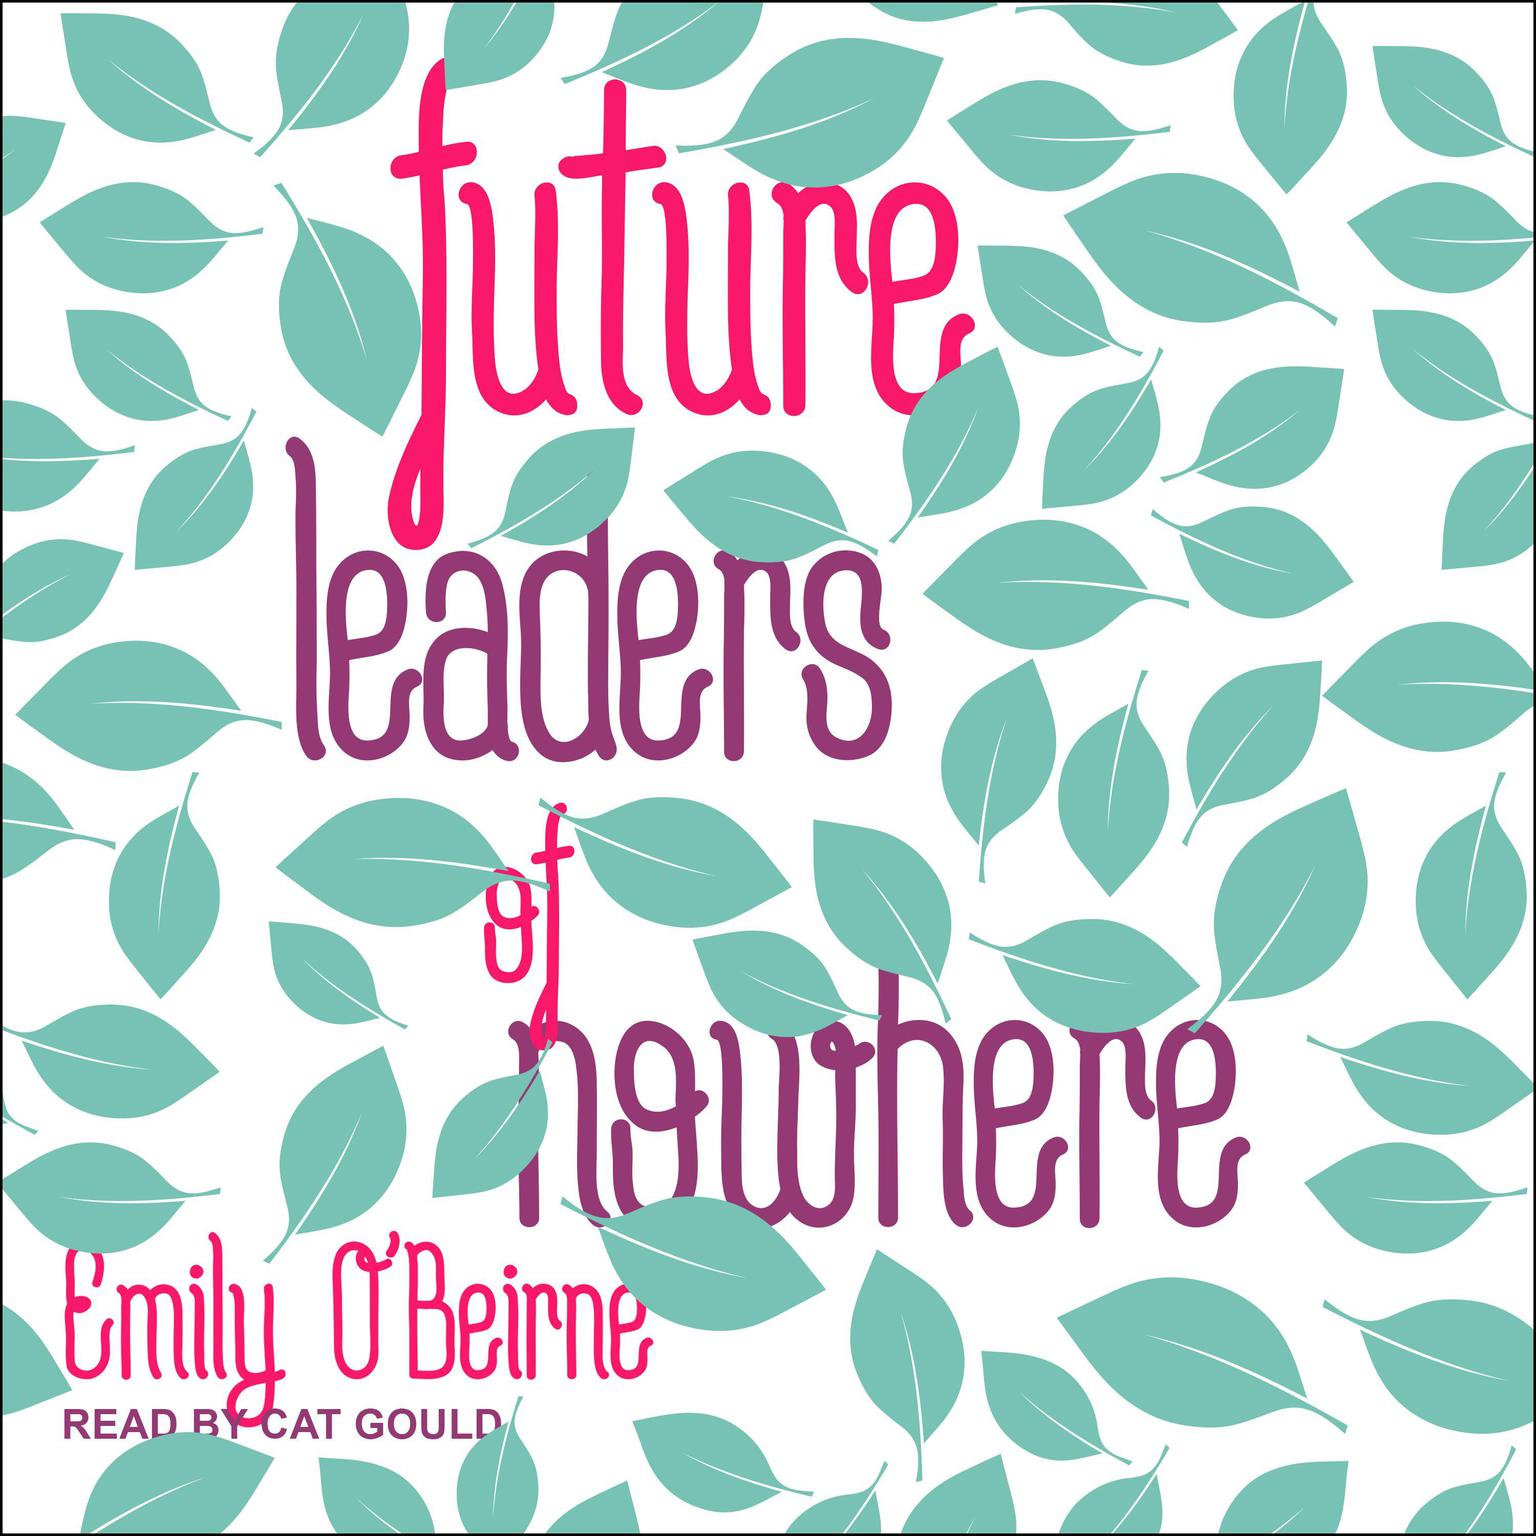 Future Leaders of Nowhere Audiobook, by Emily O’Beirne